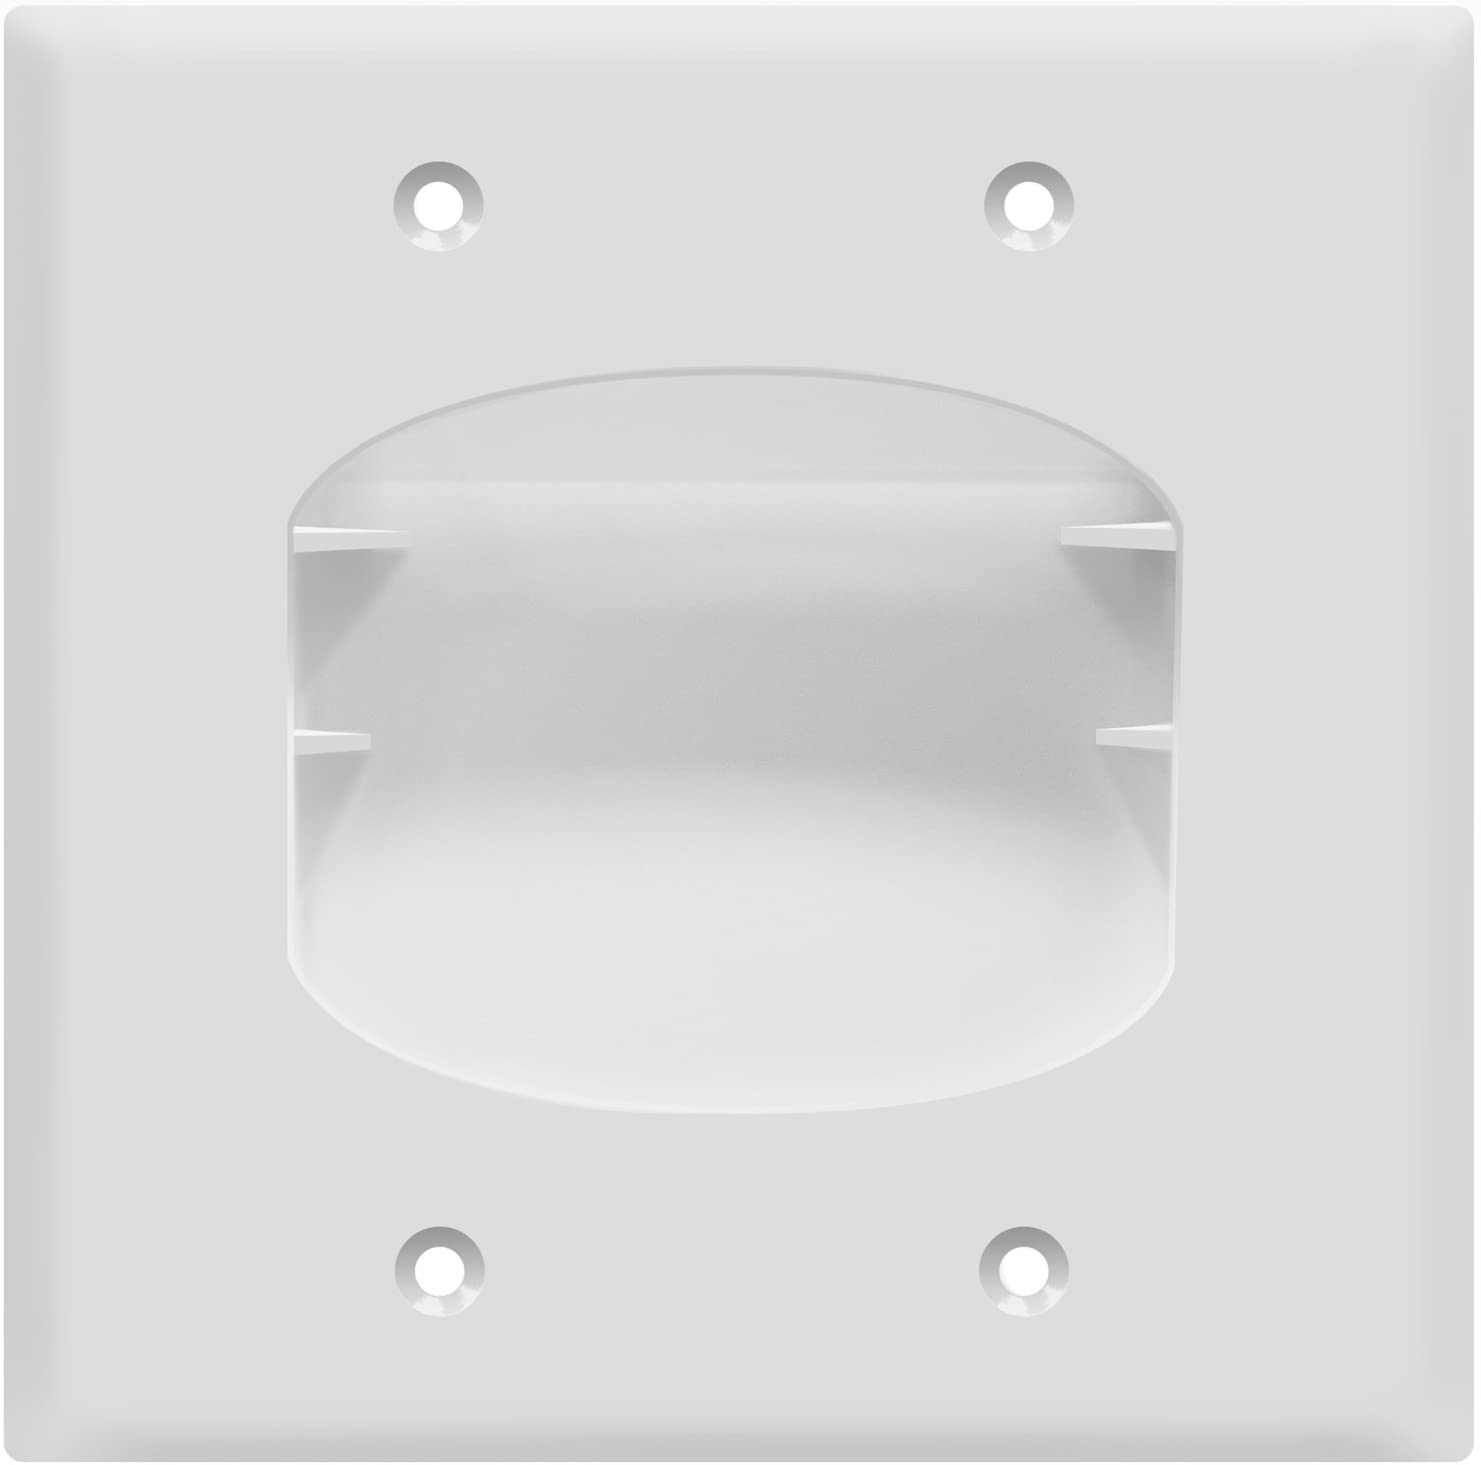 VCE 1-Gang Recessed Low Voltage Cable Plate Wall Plate Internal Management Cable Pass Through Nose Plate 3 Pack 